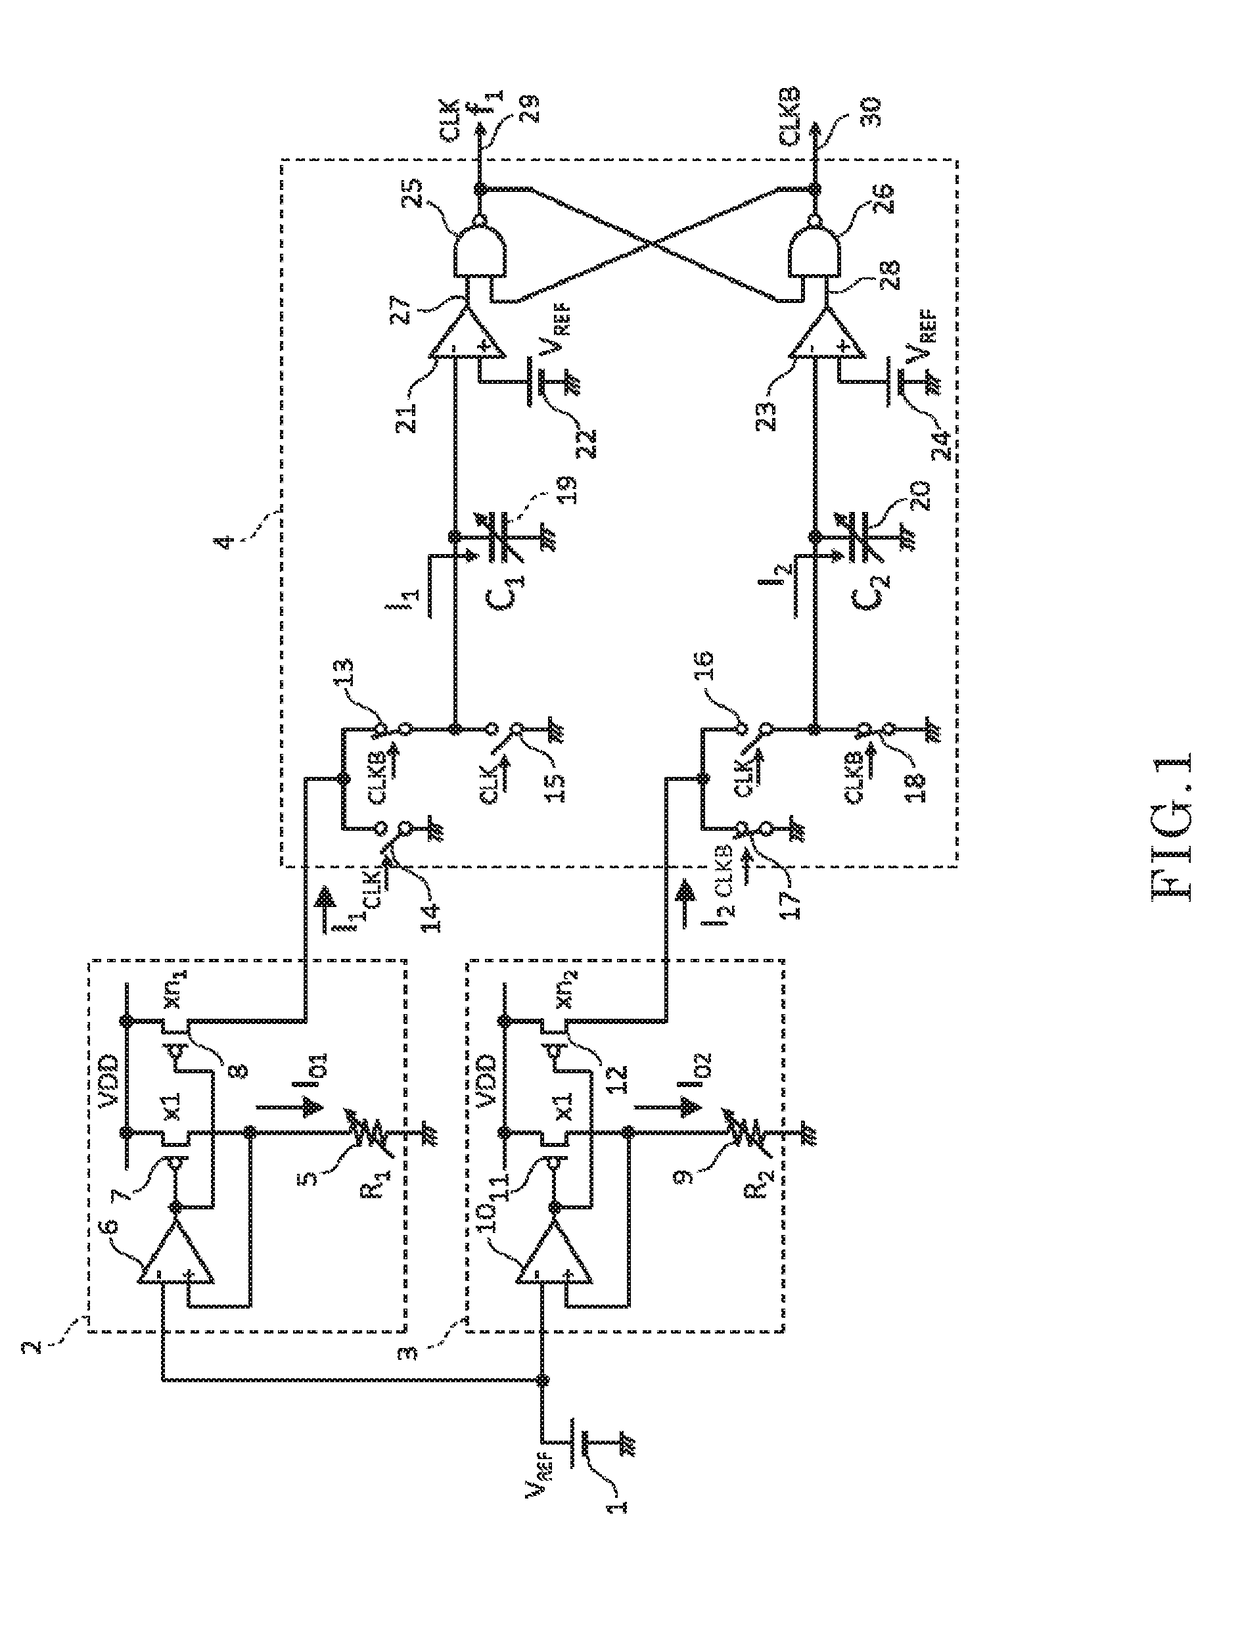 Relaxation oscillator and wireless device including relaxation oscillator